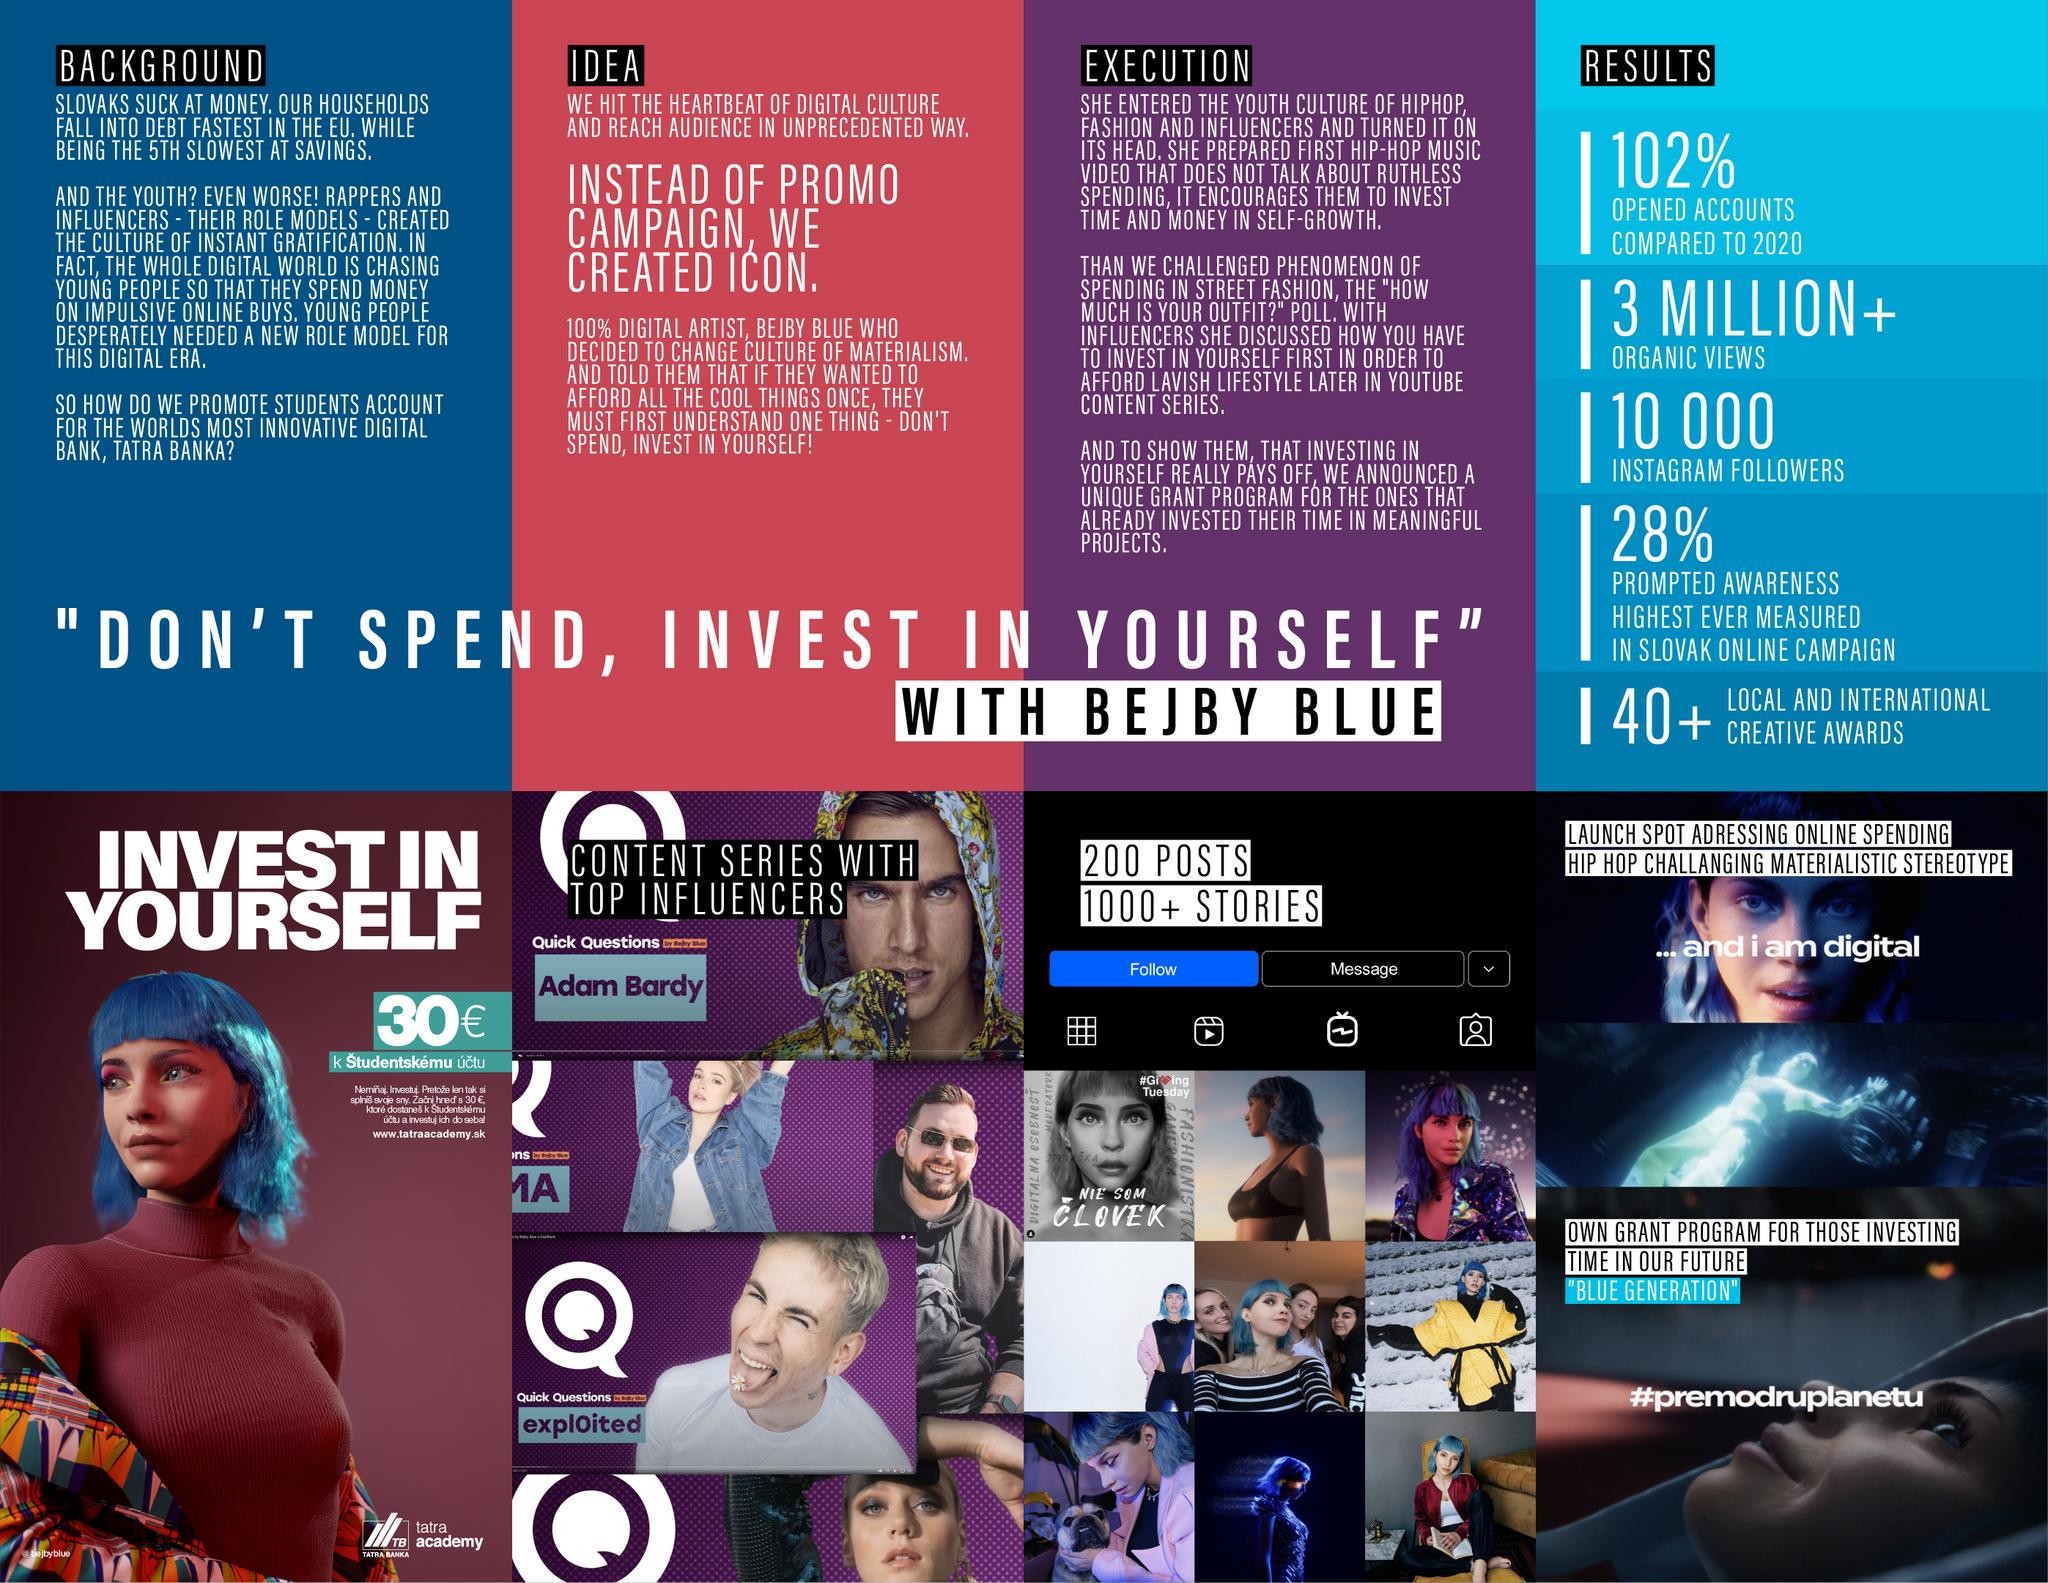 "Don't spend, invest in yourself!" with Bejby Blue